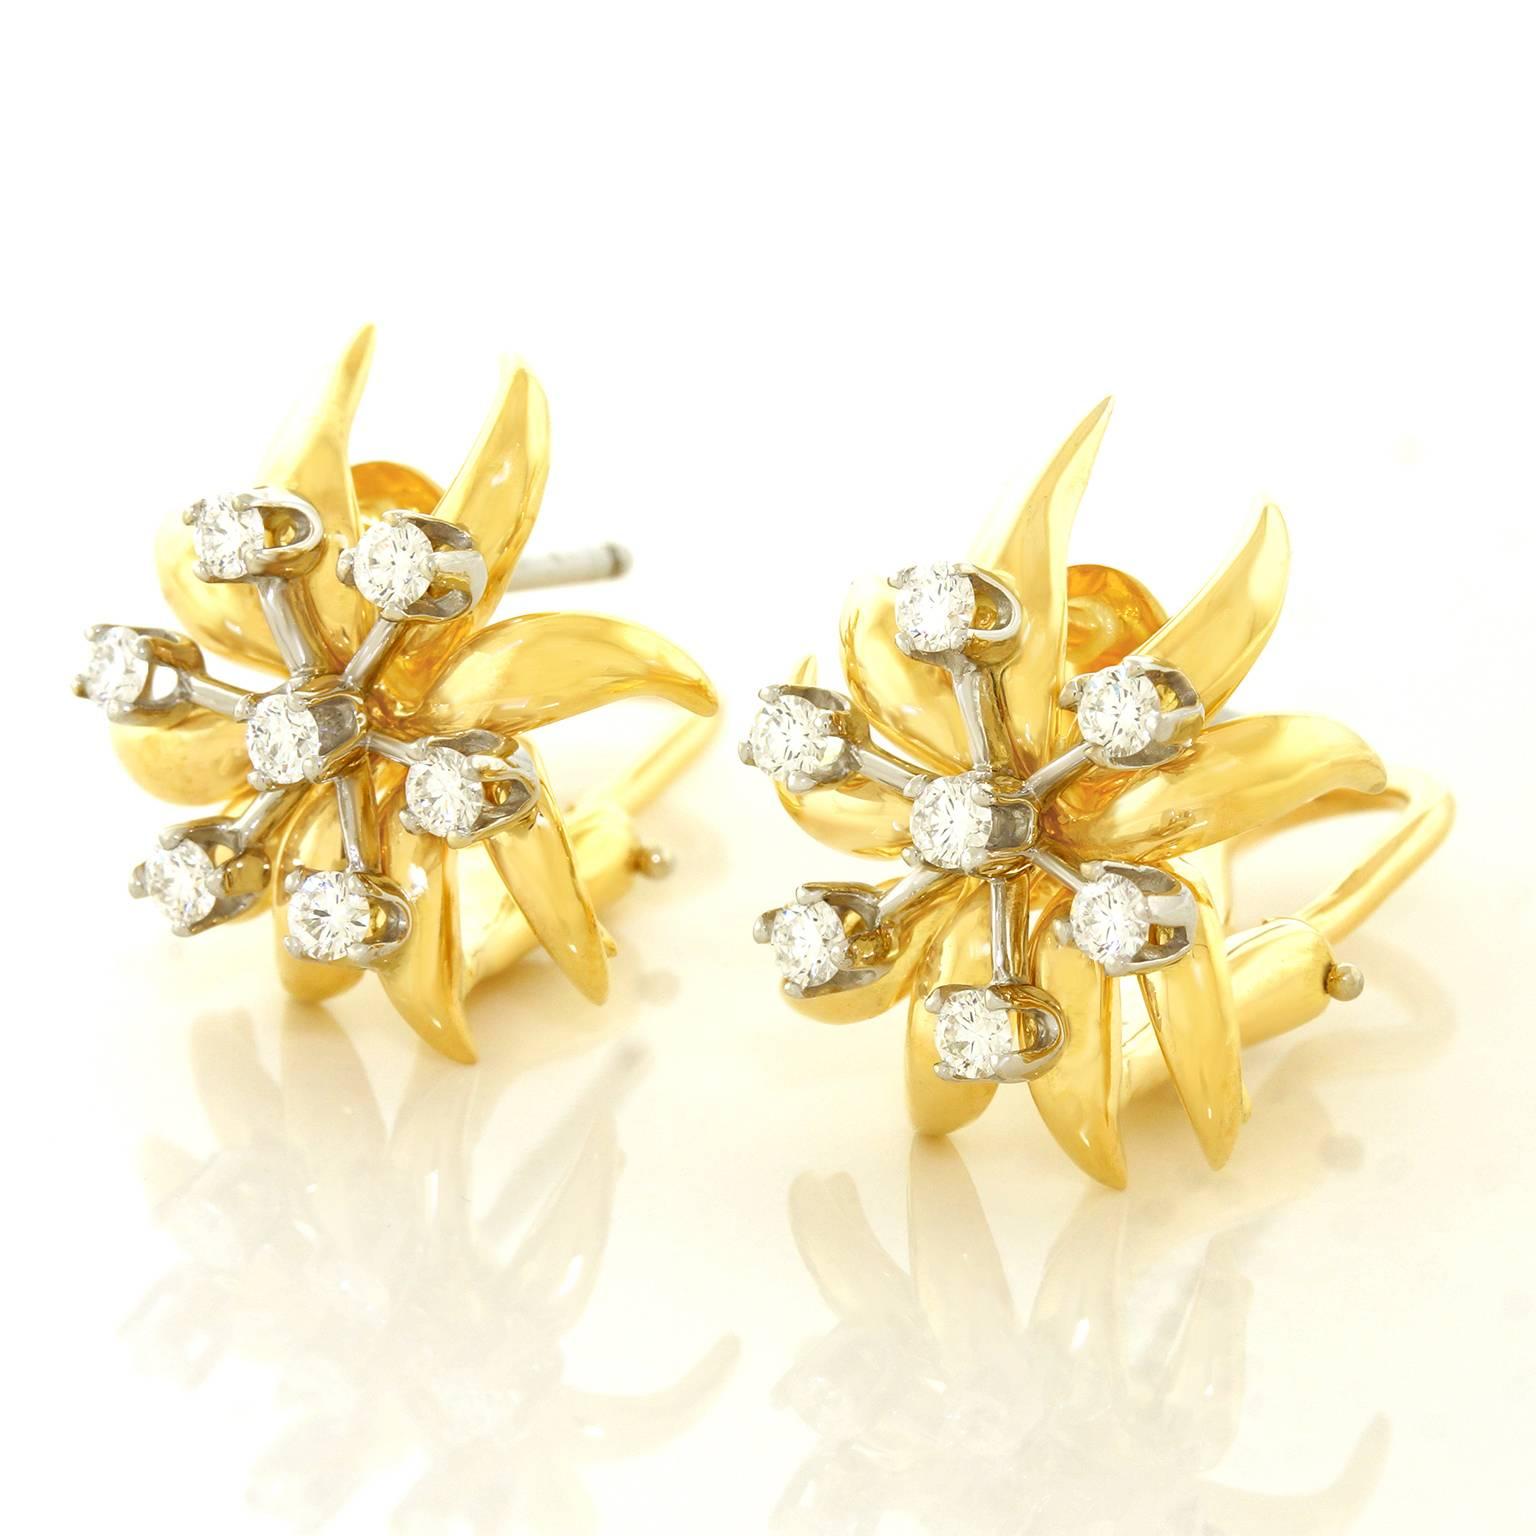 Schlumberger for Tiffany Diamond-set Platinum and Gold “Flame” Earrings 2